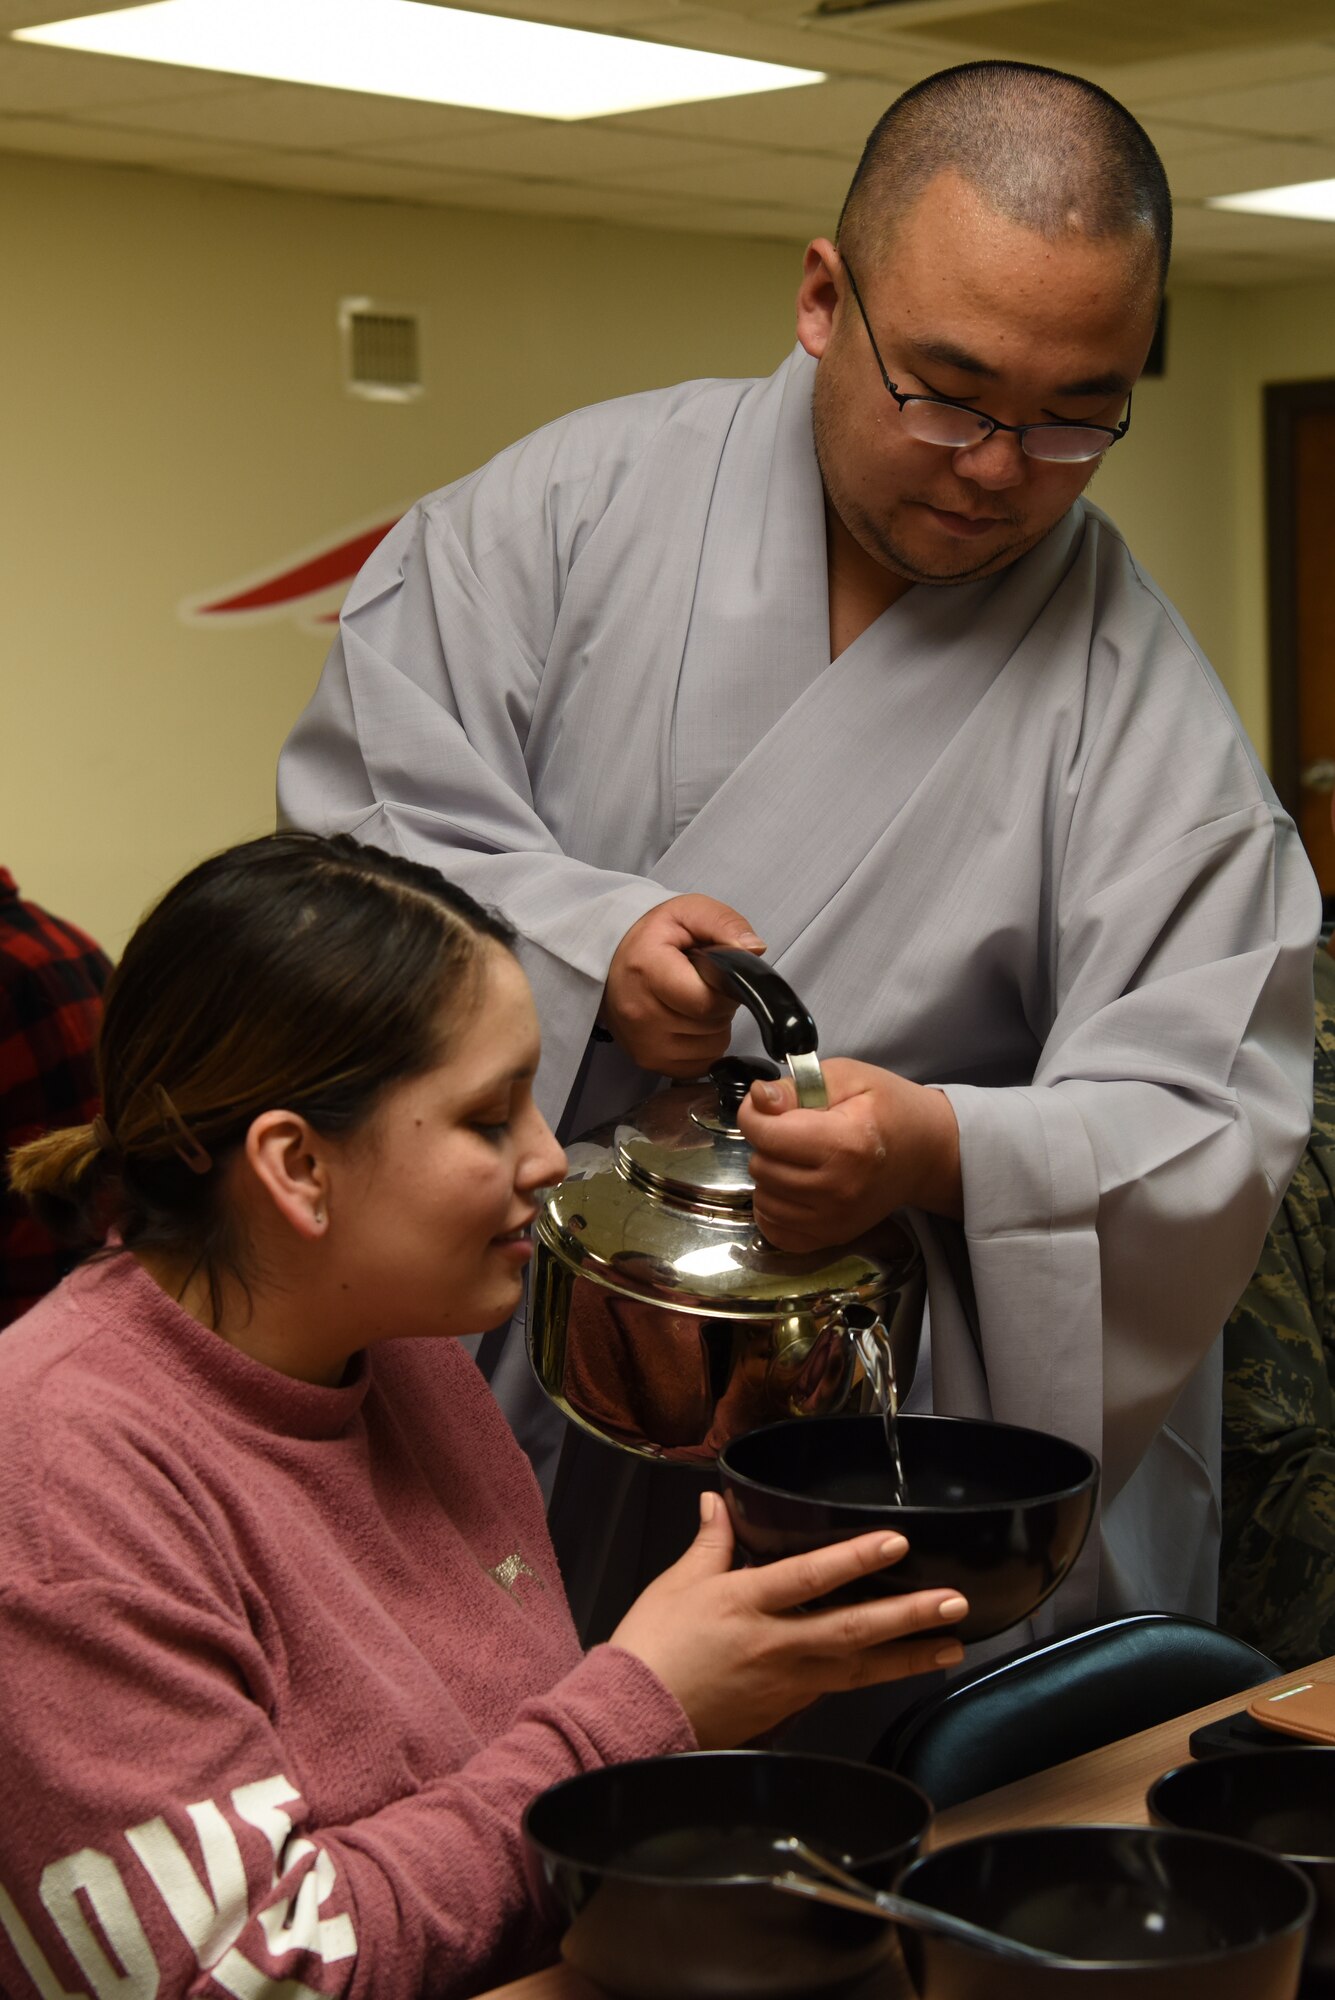 Republic of Korea Air Force Capt. Sungcheol Lee, 38th Fighter Group chaplain, pours water into a bowl for U.S. Air Force Tech Sgt. Diane Balmer, 8th Force Support Squadron manpower analyst, during a Buddhist immersion course at Kunsan Air Base, Republic of Korea, April 11, 2019. Balmer used the water to clean bowls and utensils prior to a traditional Buddhist meal. (U.S. Air Force photo by Staff Sgt. Joshua Edwards)